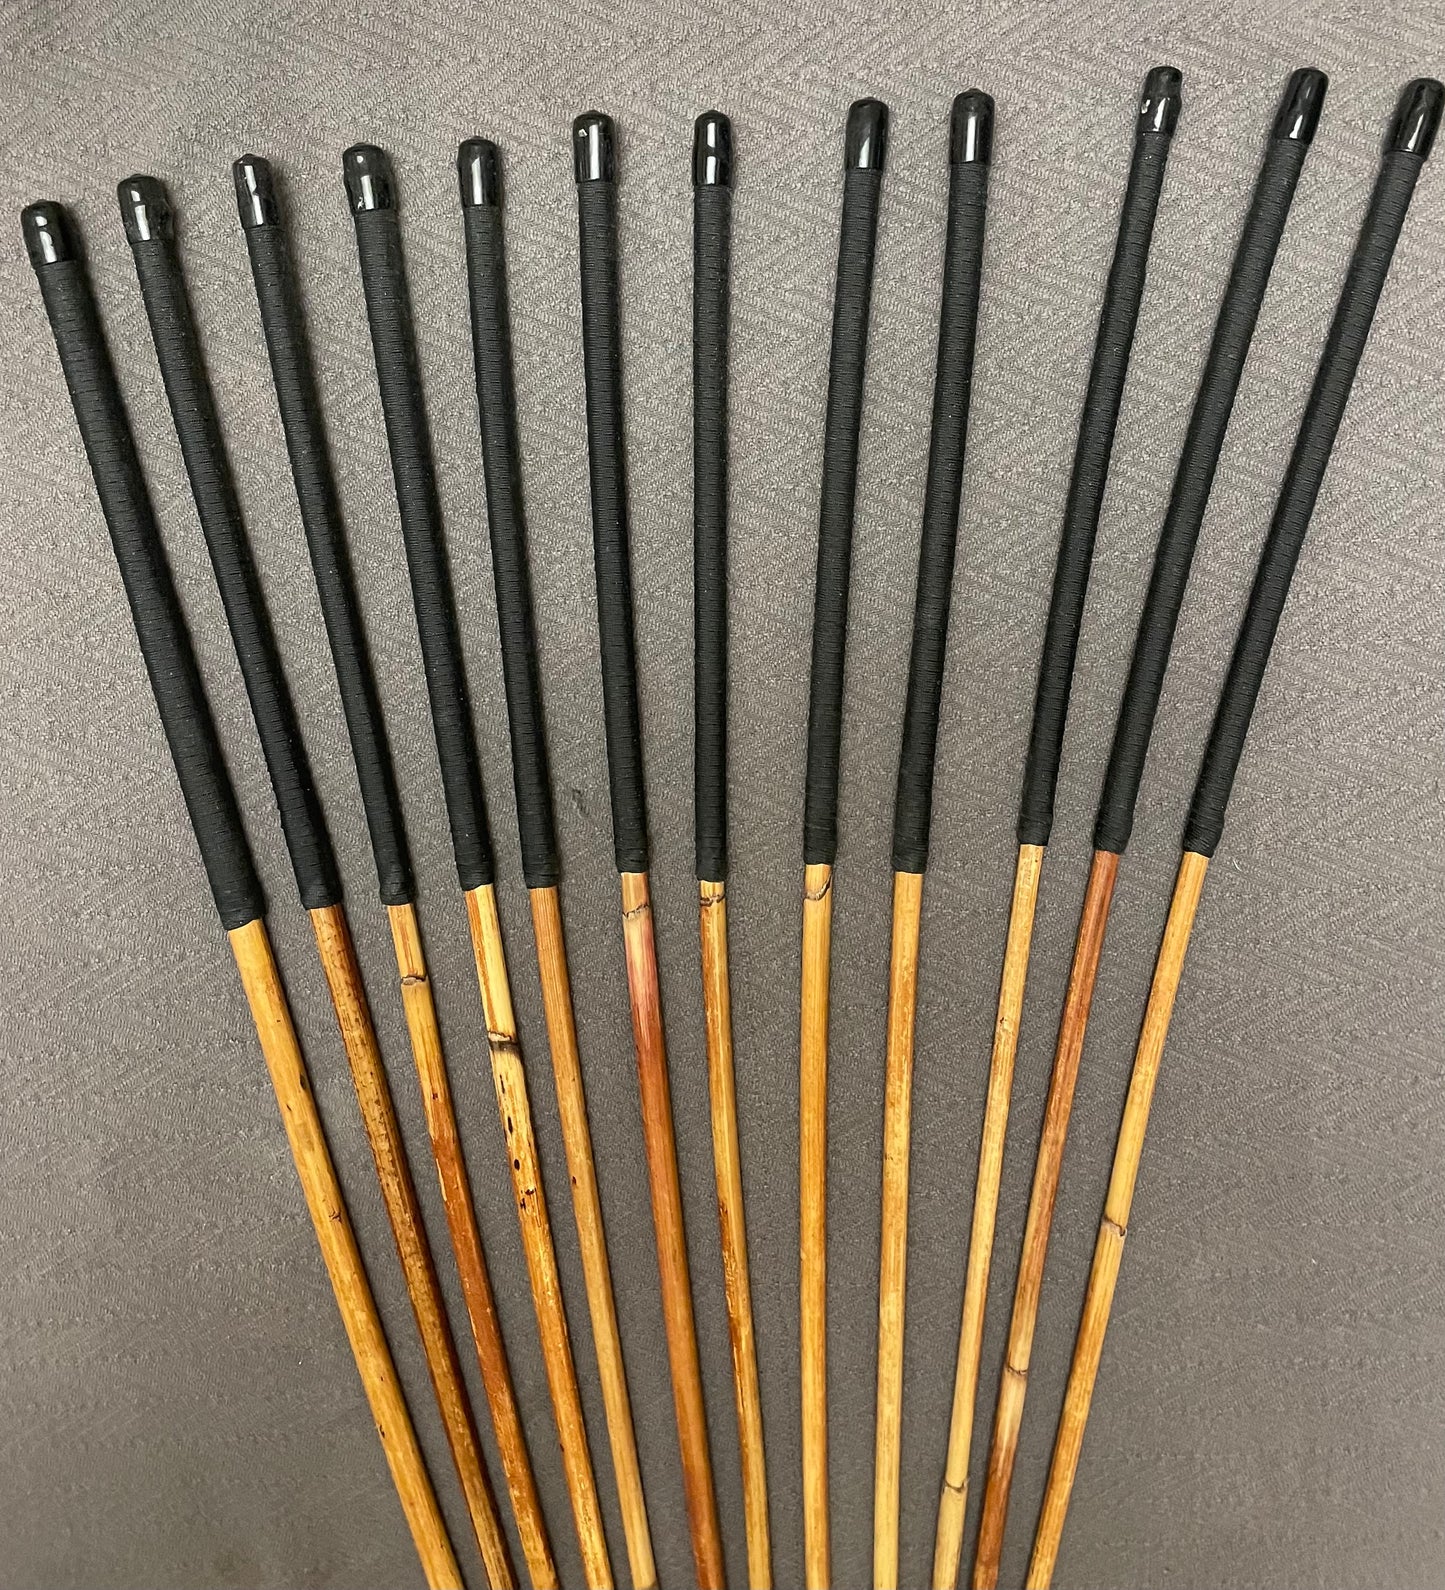 Set of 12 Classic Dragon Rattan Punishment Canes with Black Paracord Handles - 95 to 100 cms Length - Sales Special